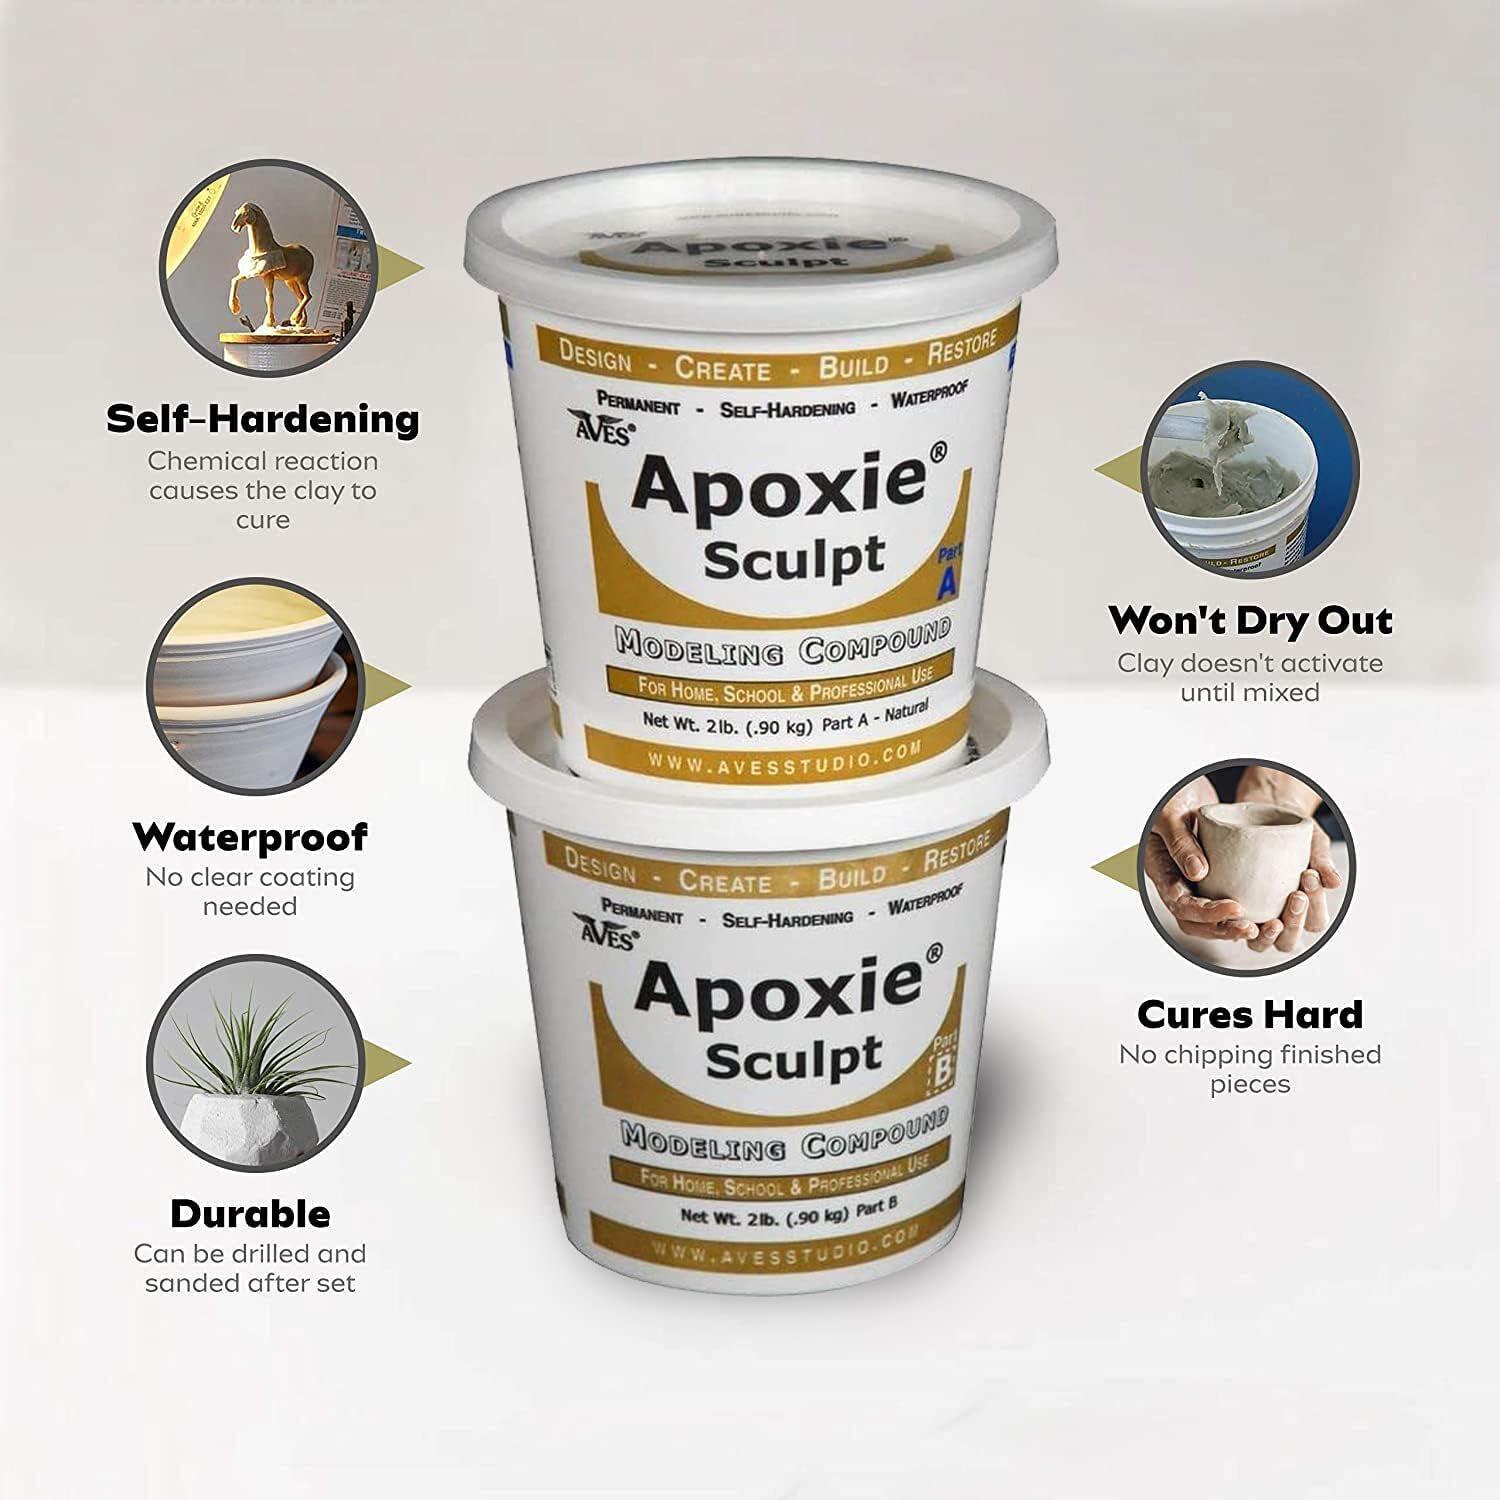 Apoxie Sculpt two-part epoxy modeling clay self-hardening 1lb